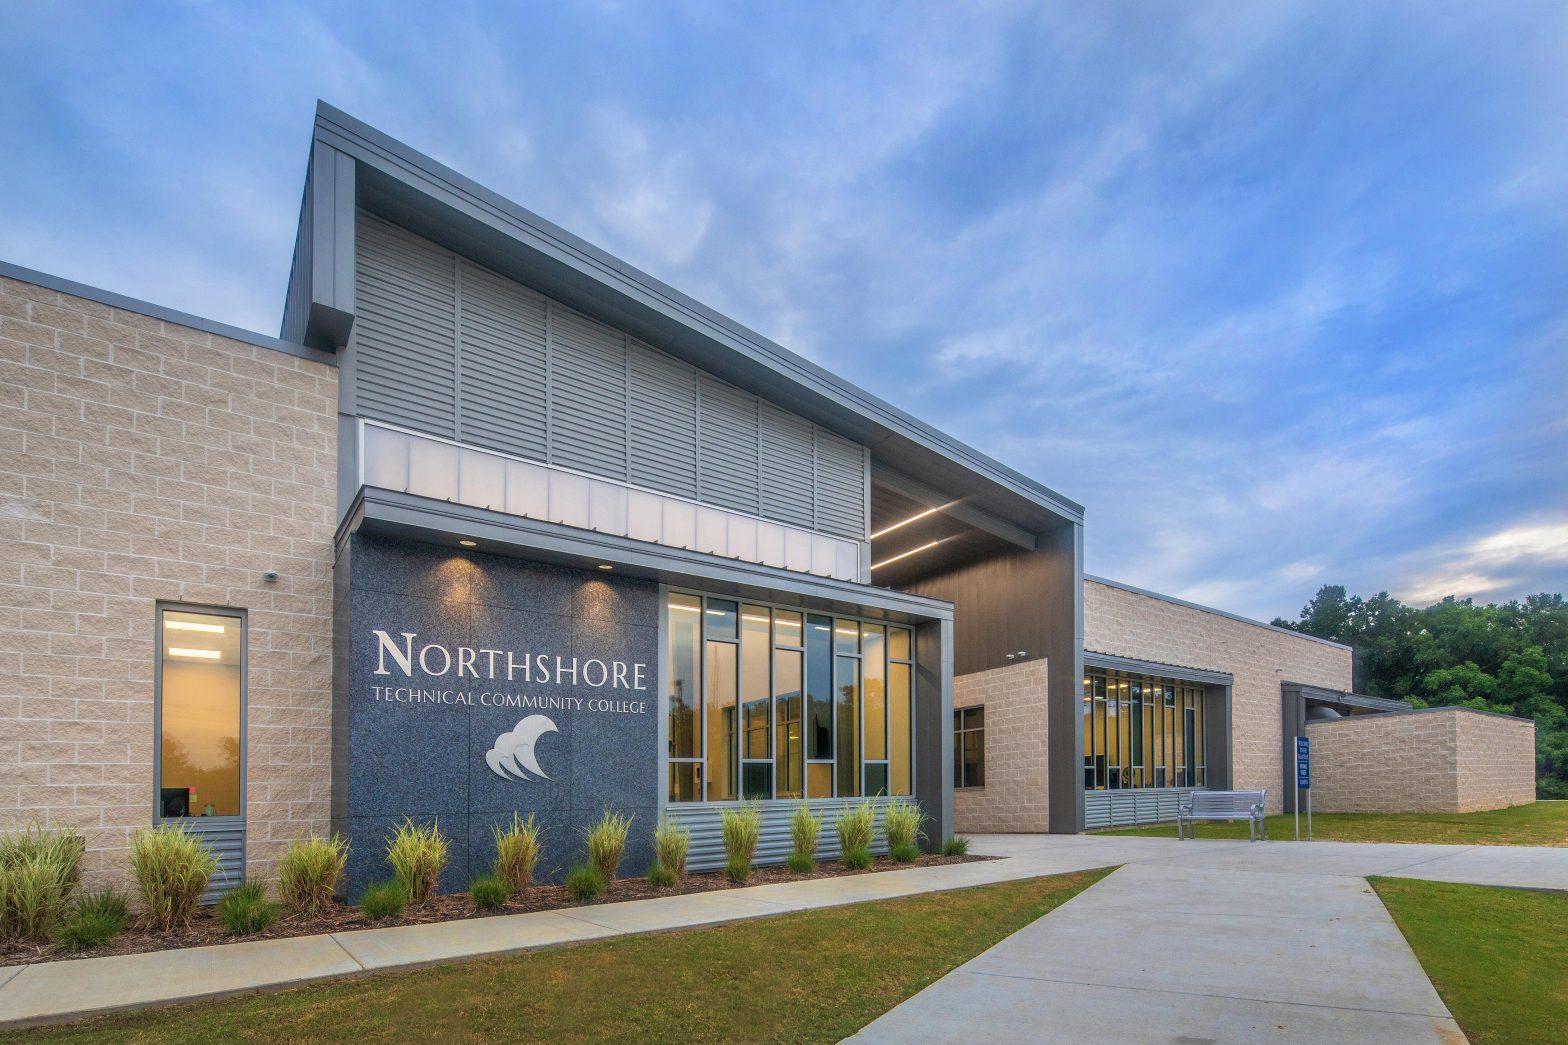 Northshore Technical Community College case study case study direct mail campaign services image